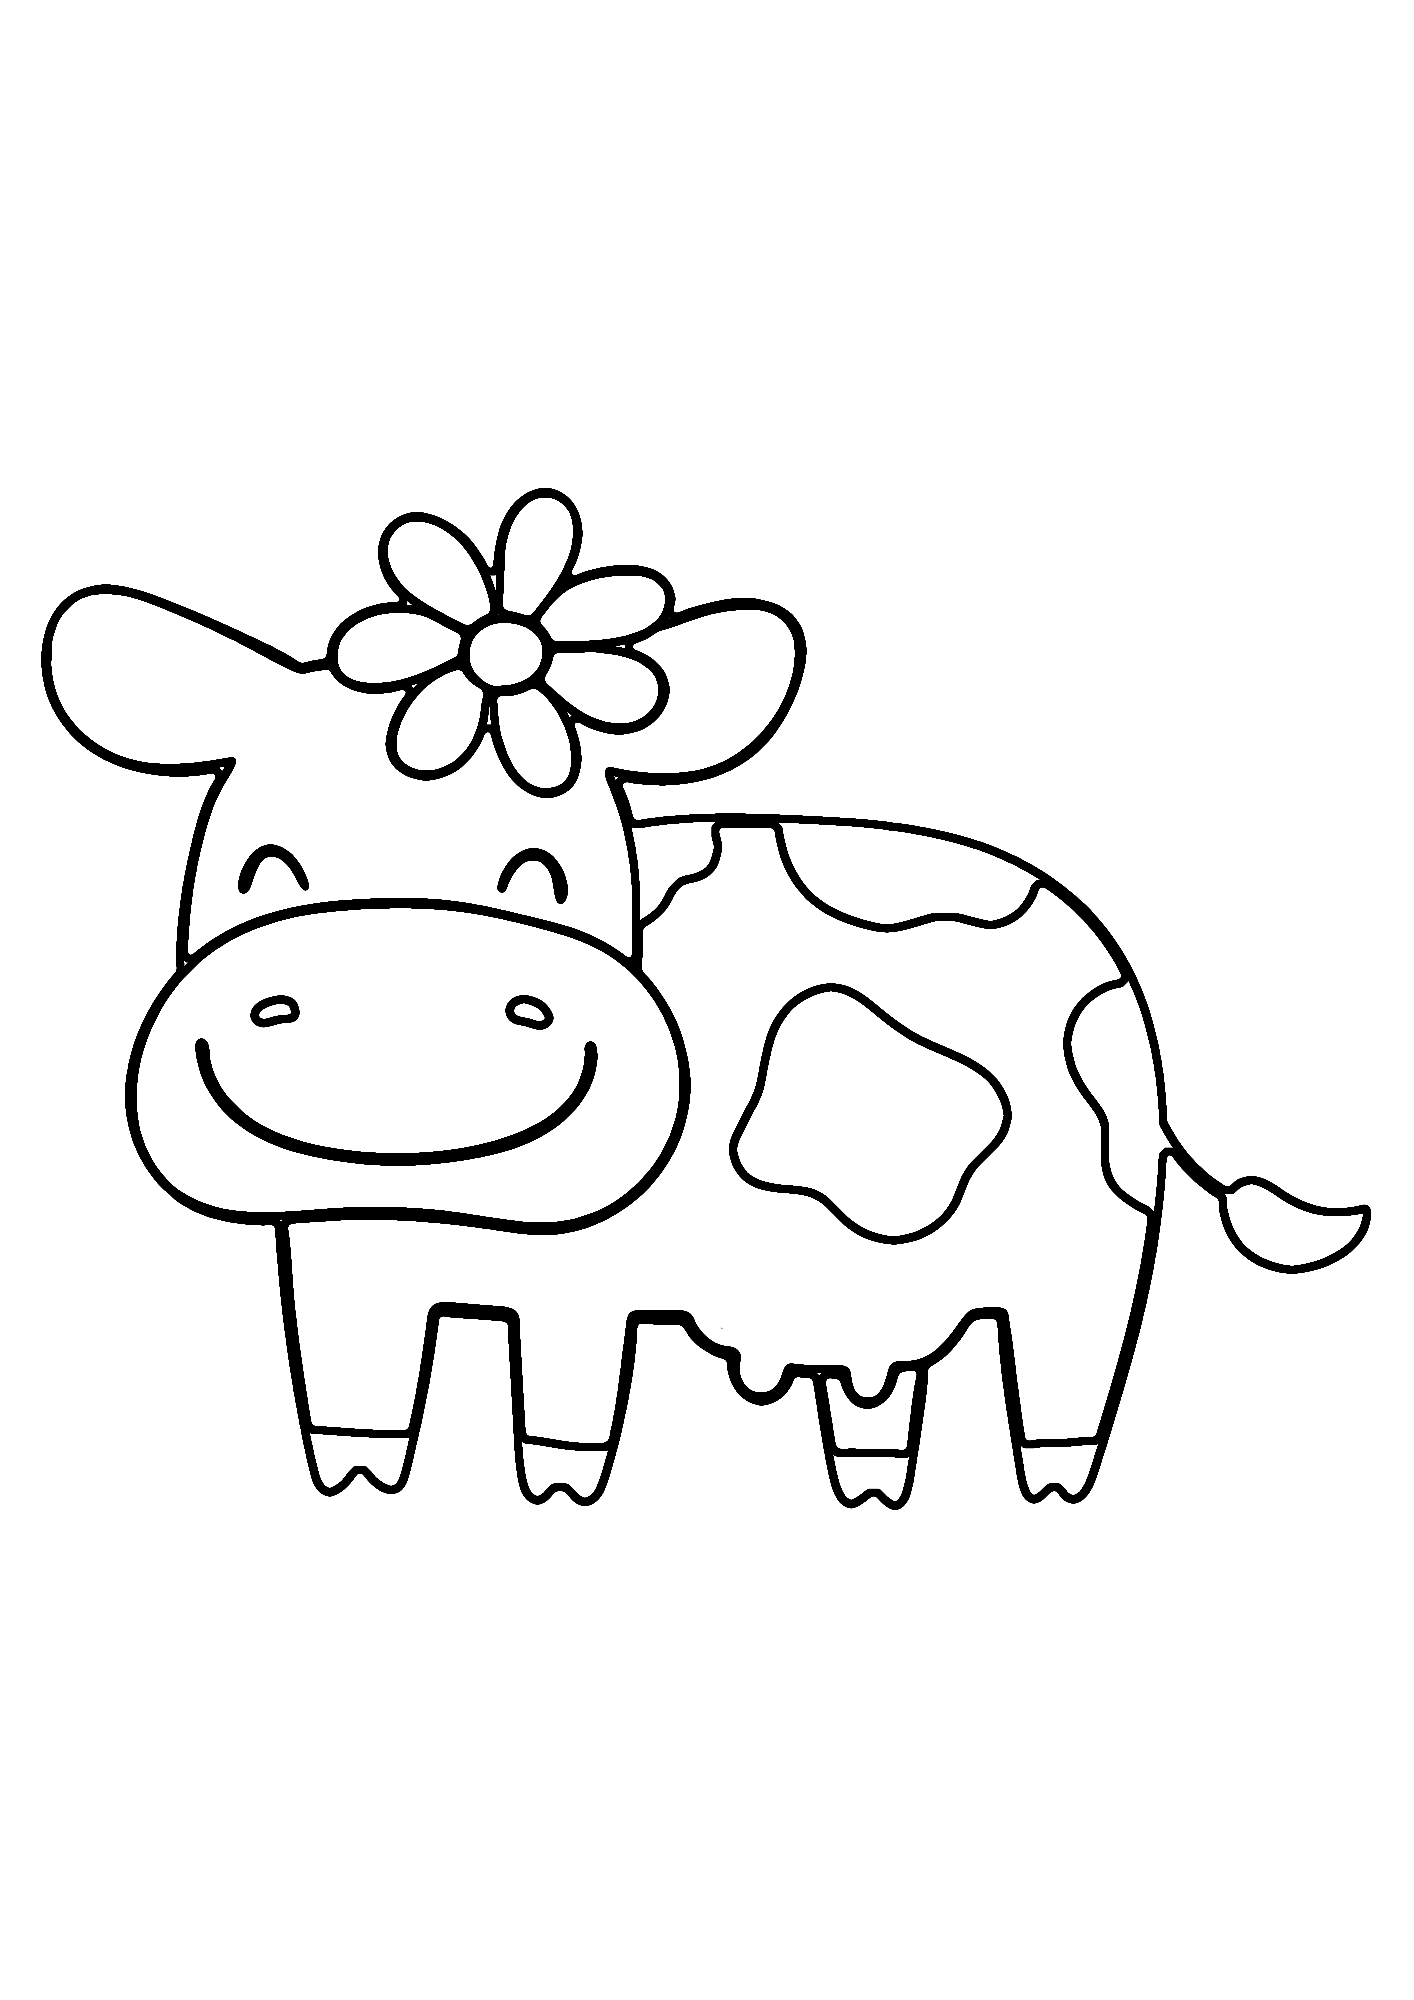 Lovely Cow Coloring Page